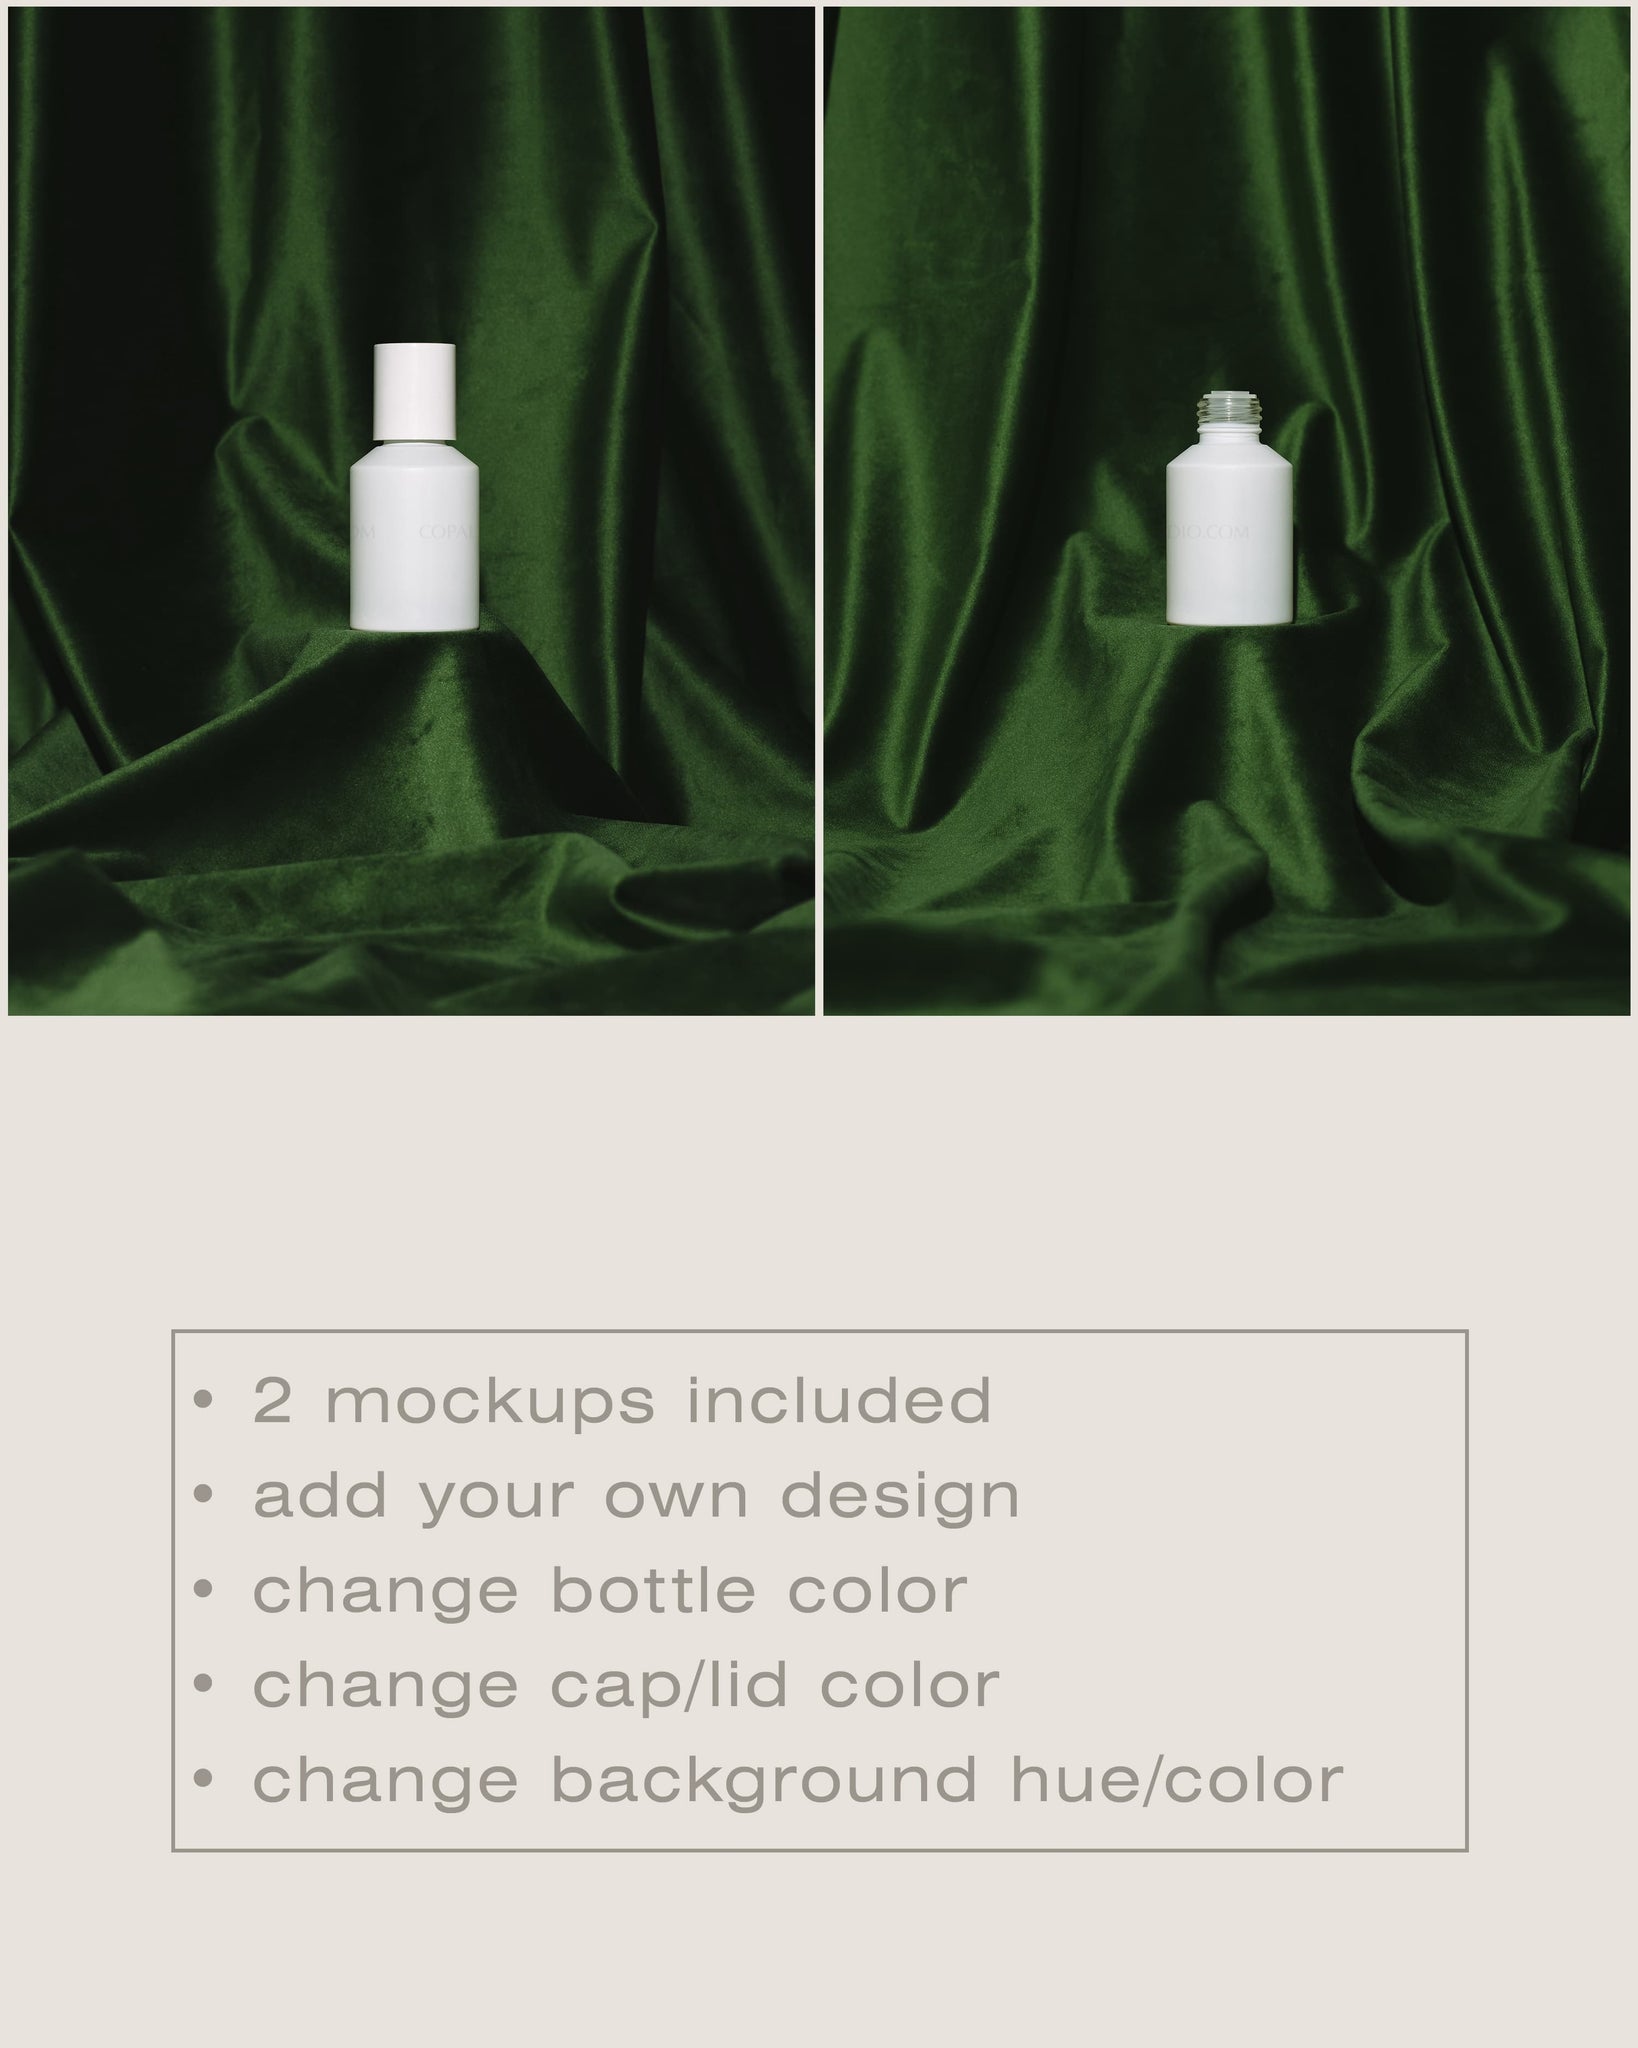 Round Cosmetic Bottle Mockup No. 5 - Copal Studio Packaging Mockups For Designers